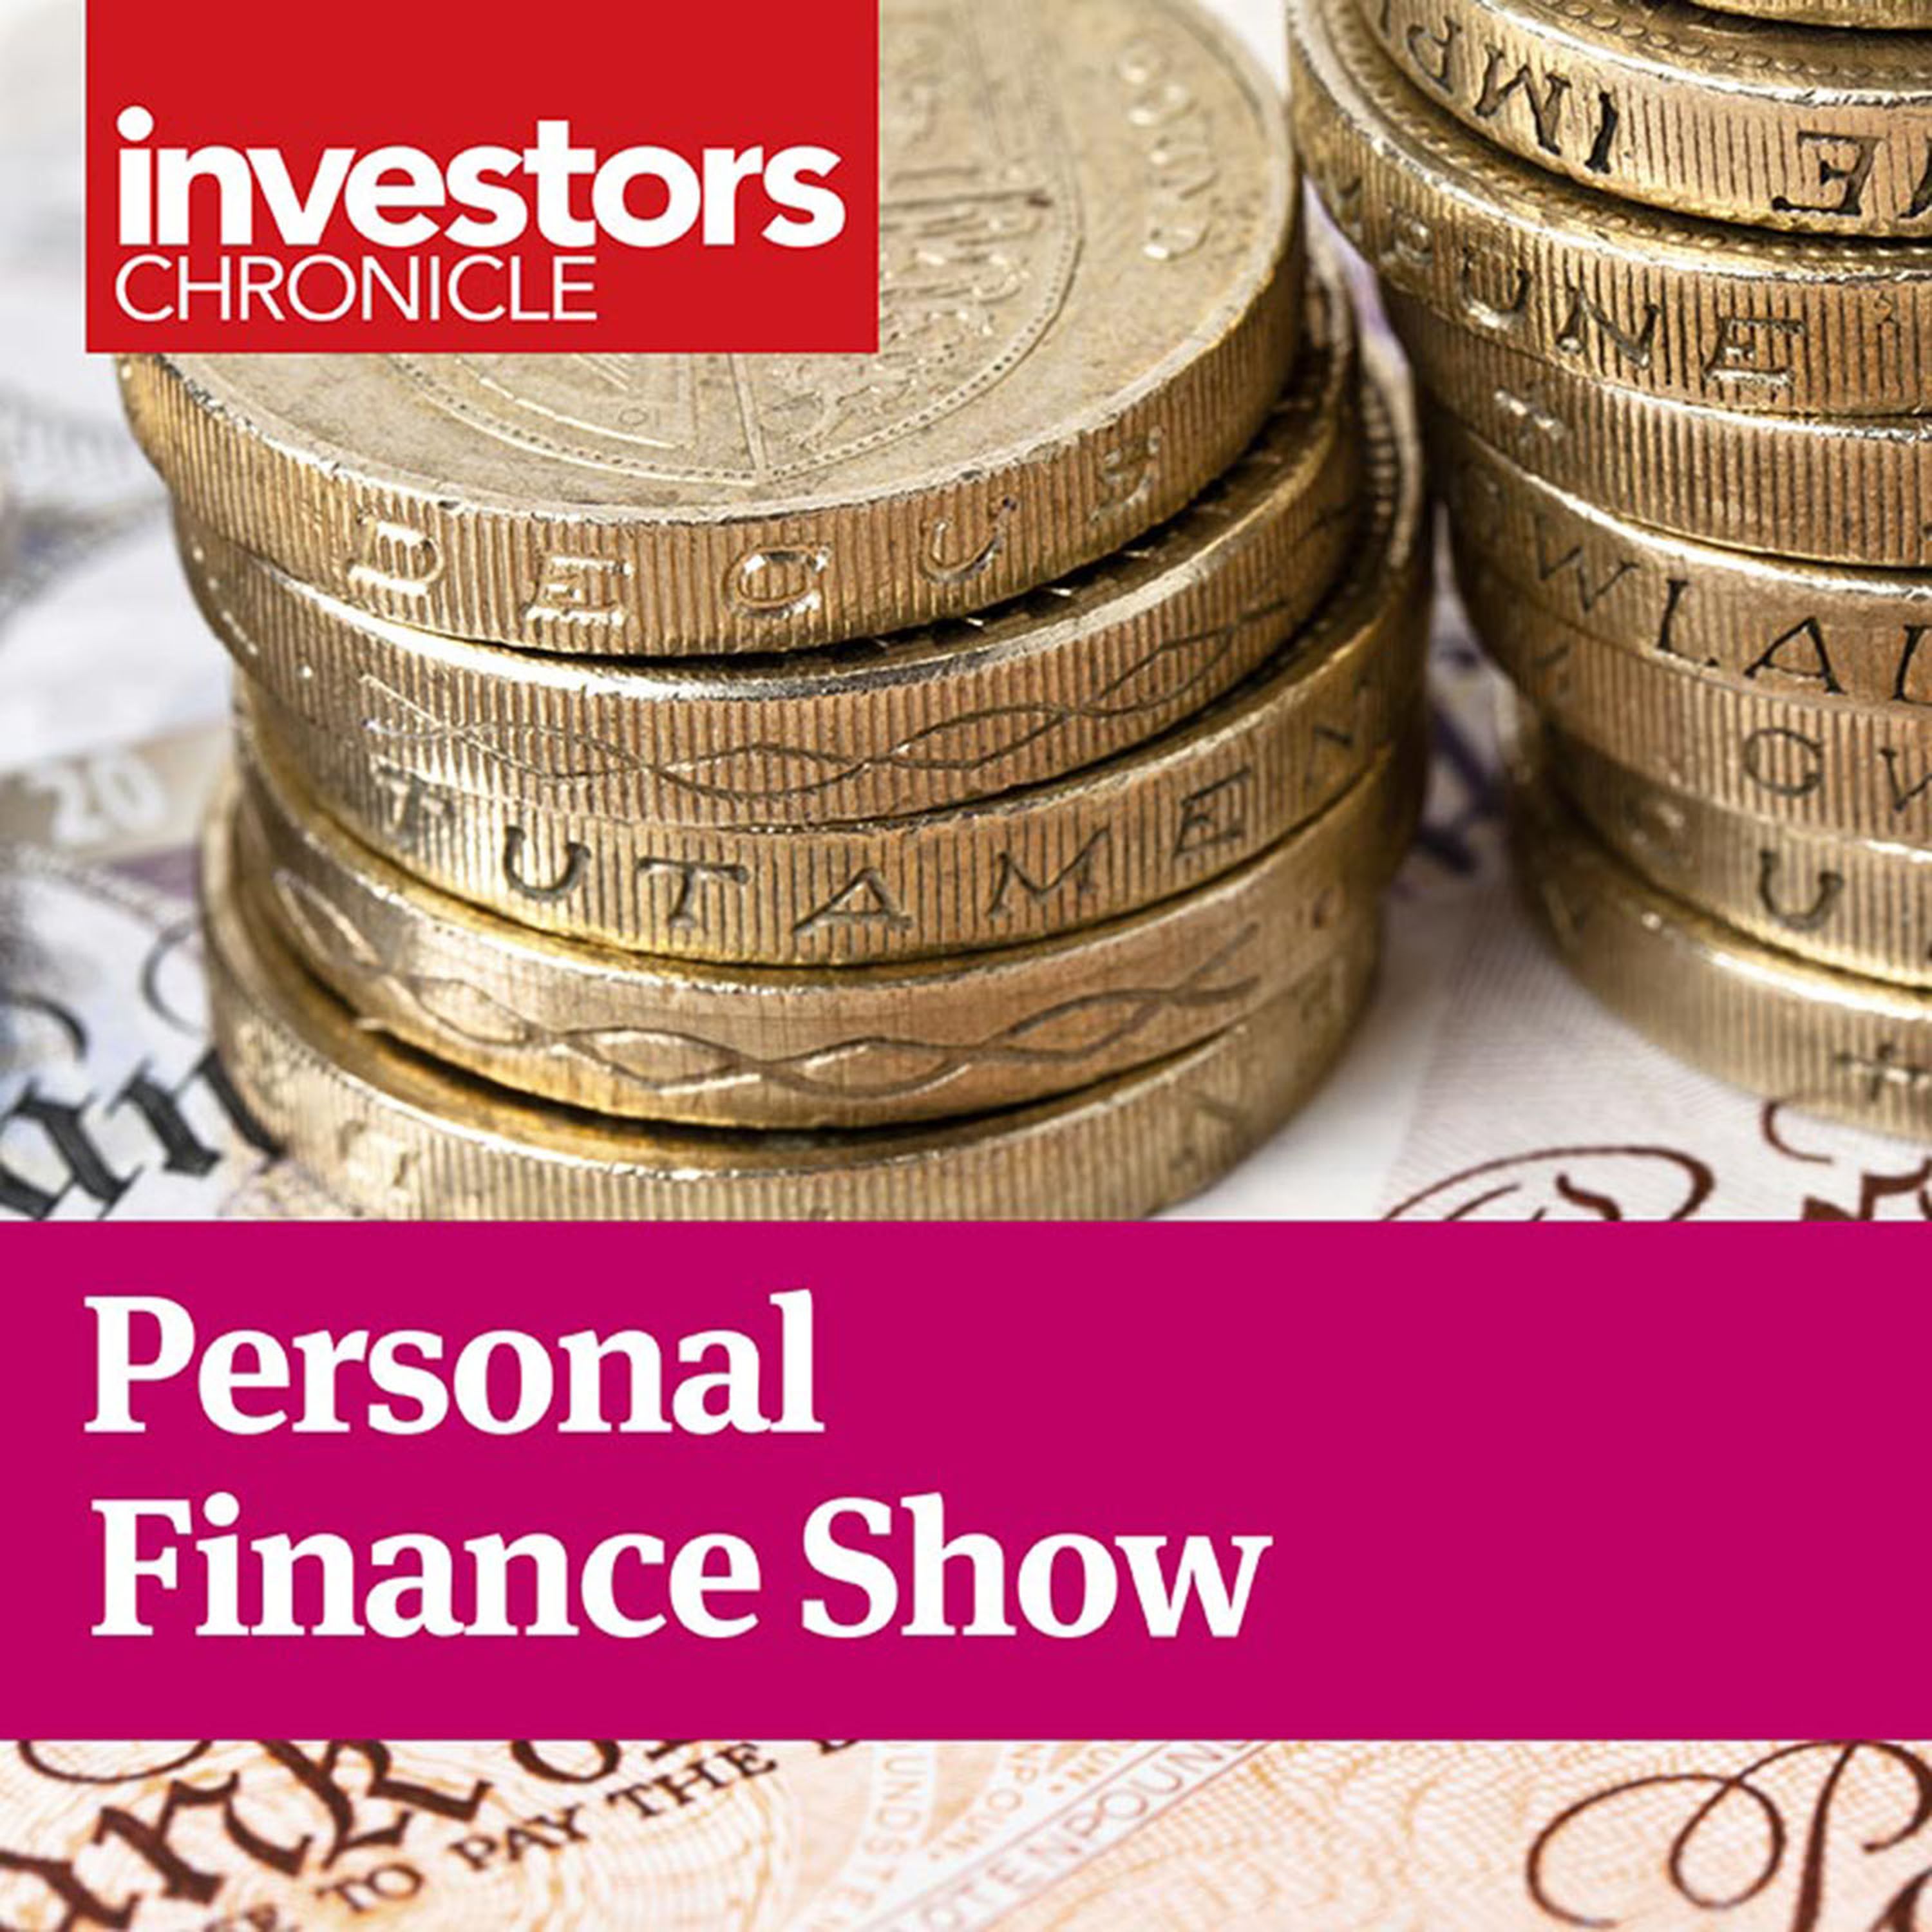 Personal Finance Show: Private rewards and undervalued income shares